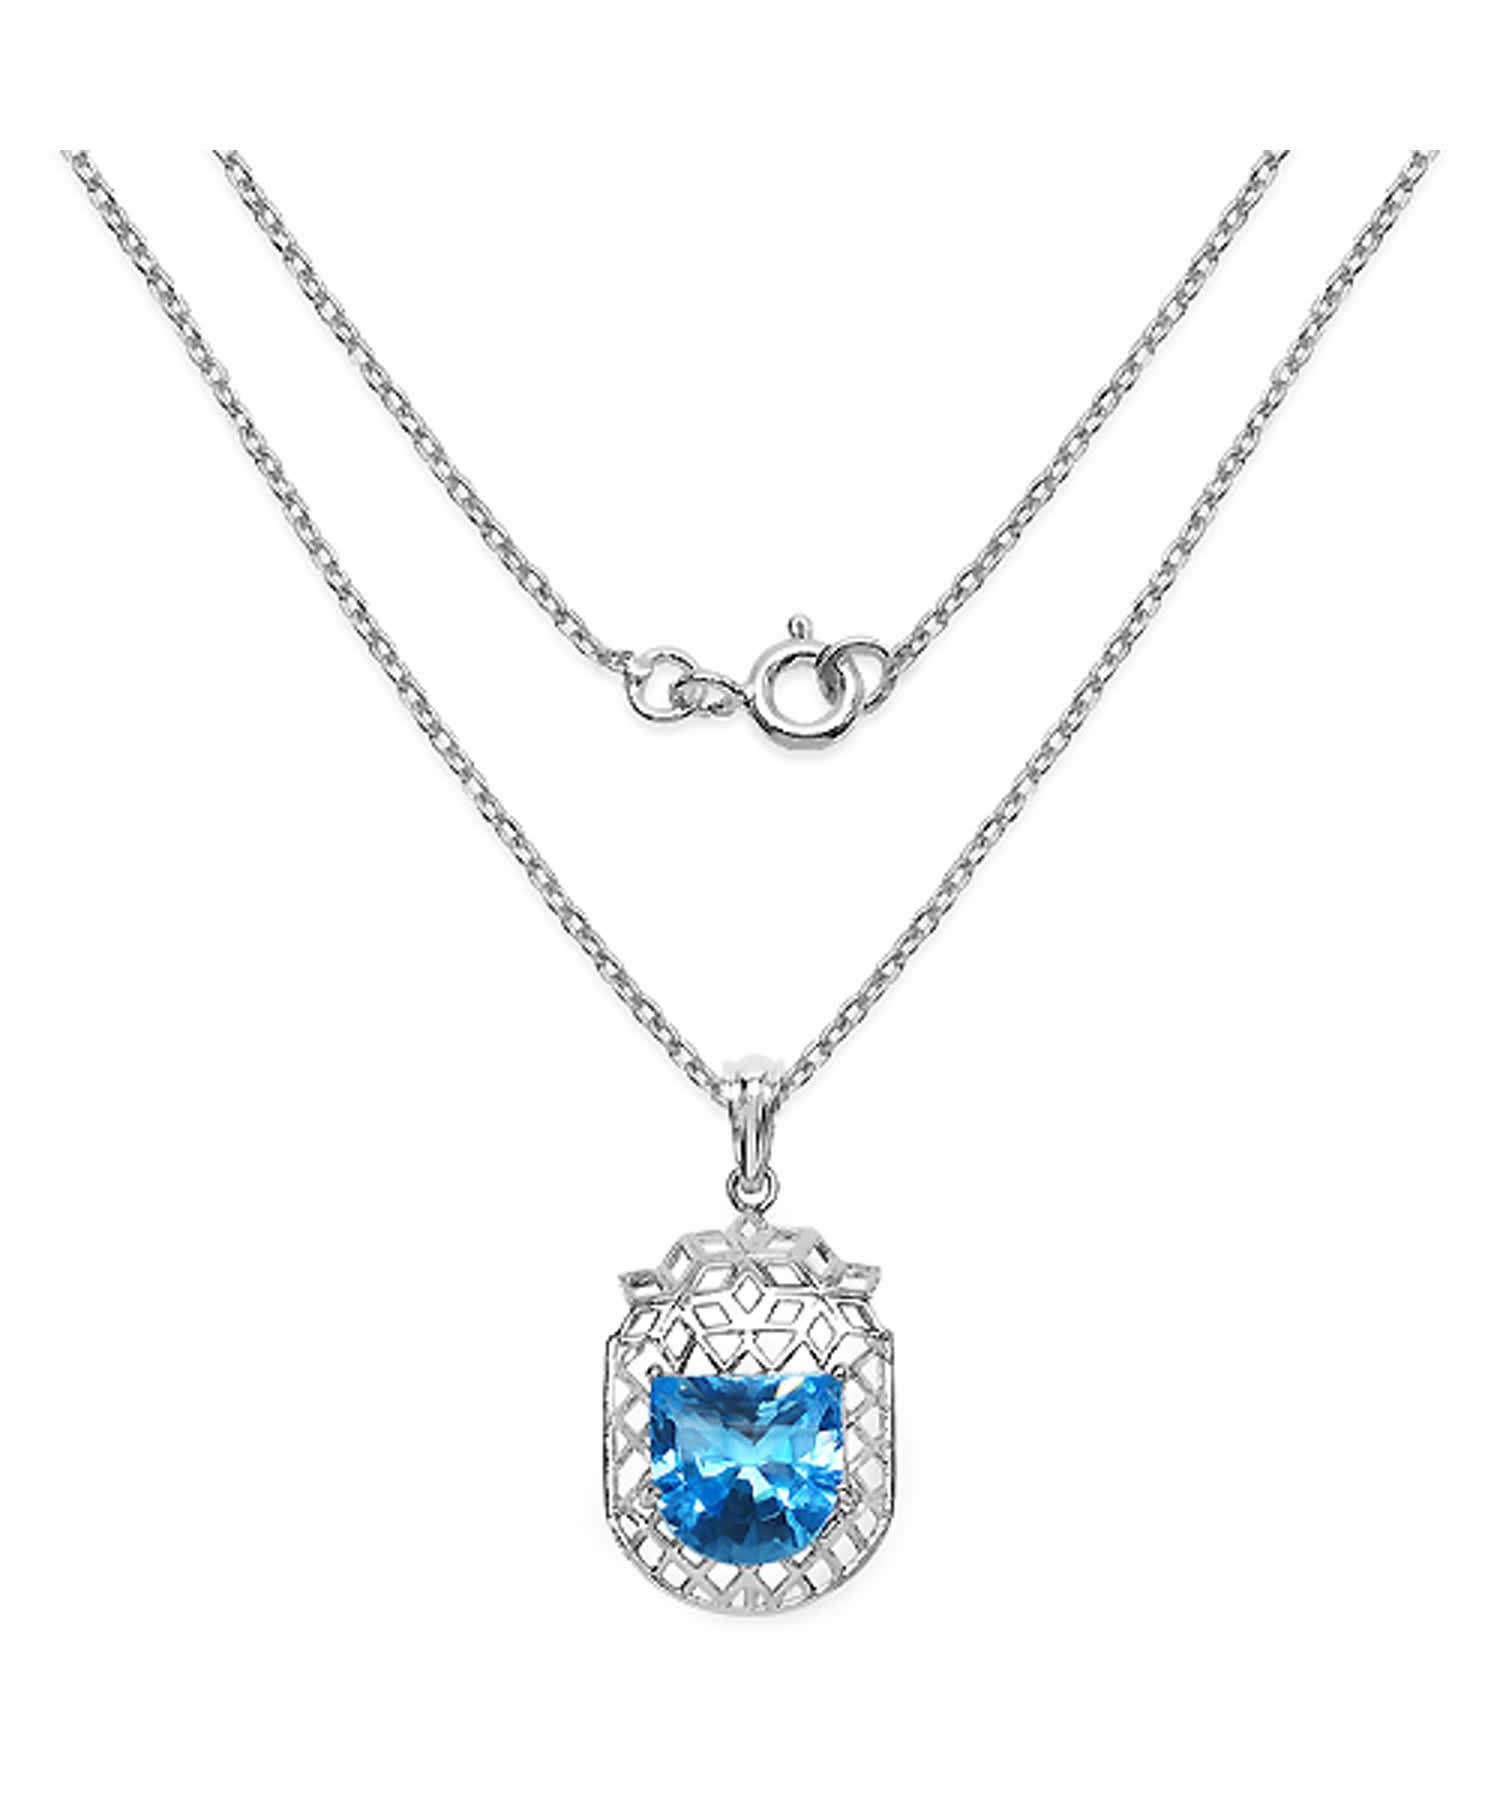 10.90ctw Natural Swiss Blue Topaz Rhodium Plated 925 Sterling Silver Pendant With Chain View 2